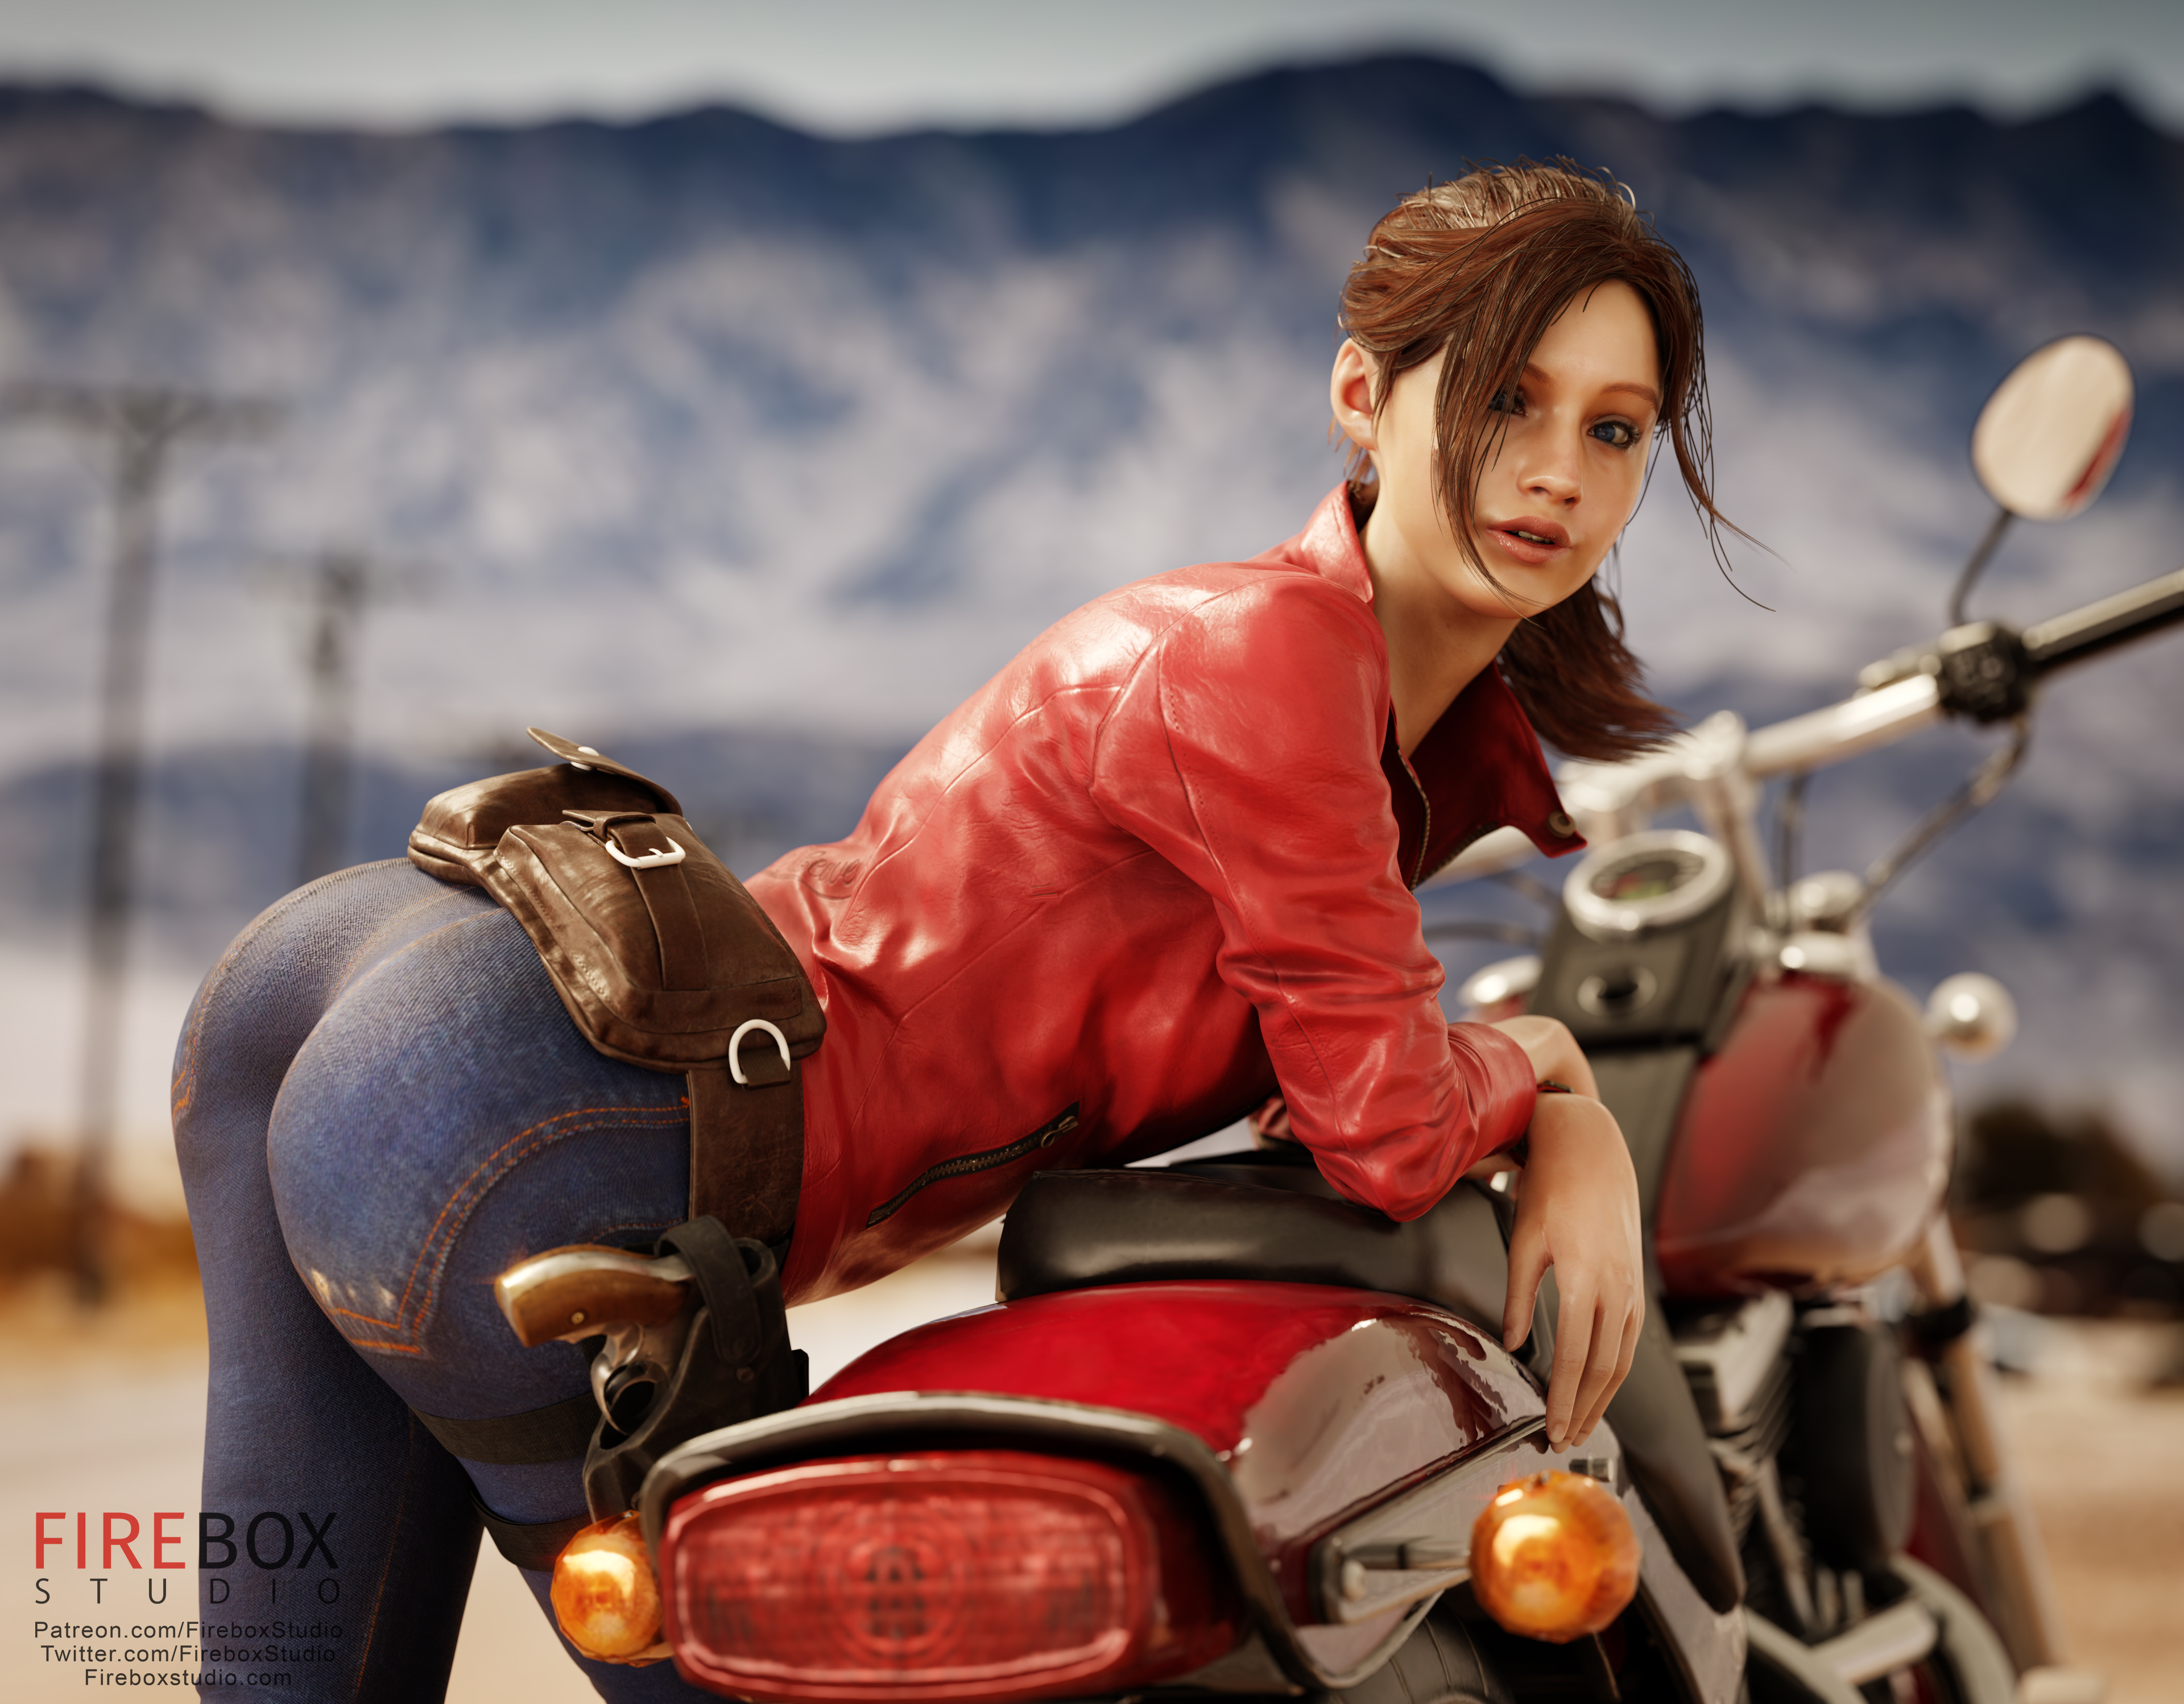 General 3840x2996 video games video game girls video game characters fantasy girl illustration artwork CGI Resident Evil ass bent over tight jeans tight clothing women jacket biker motorcycle Rebecca Chambers